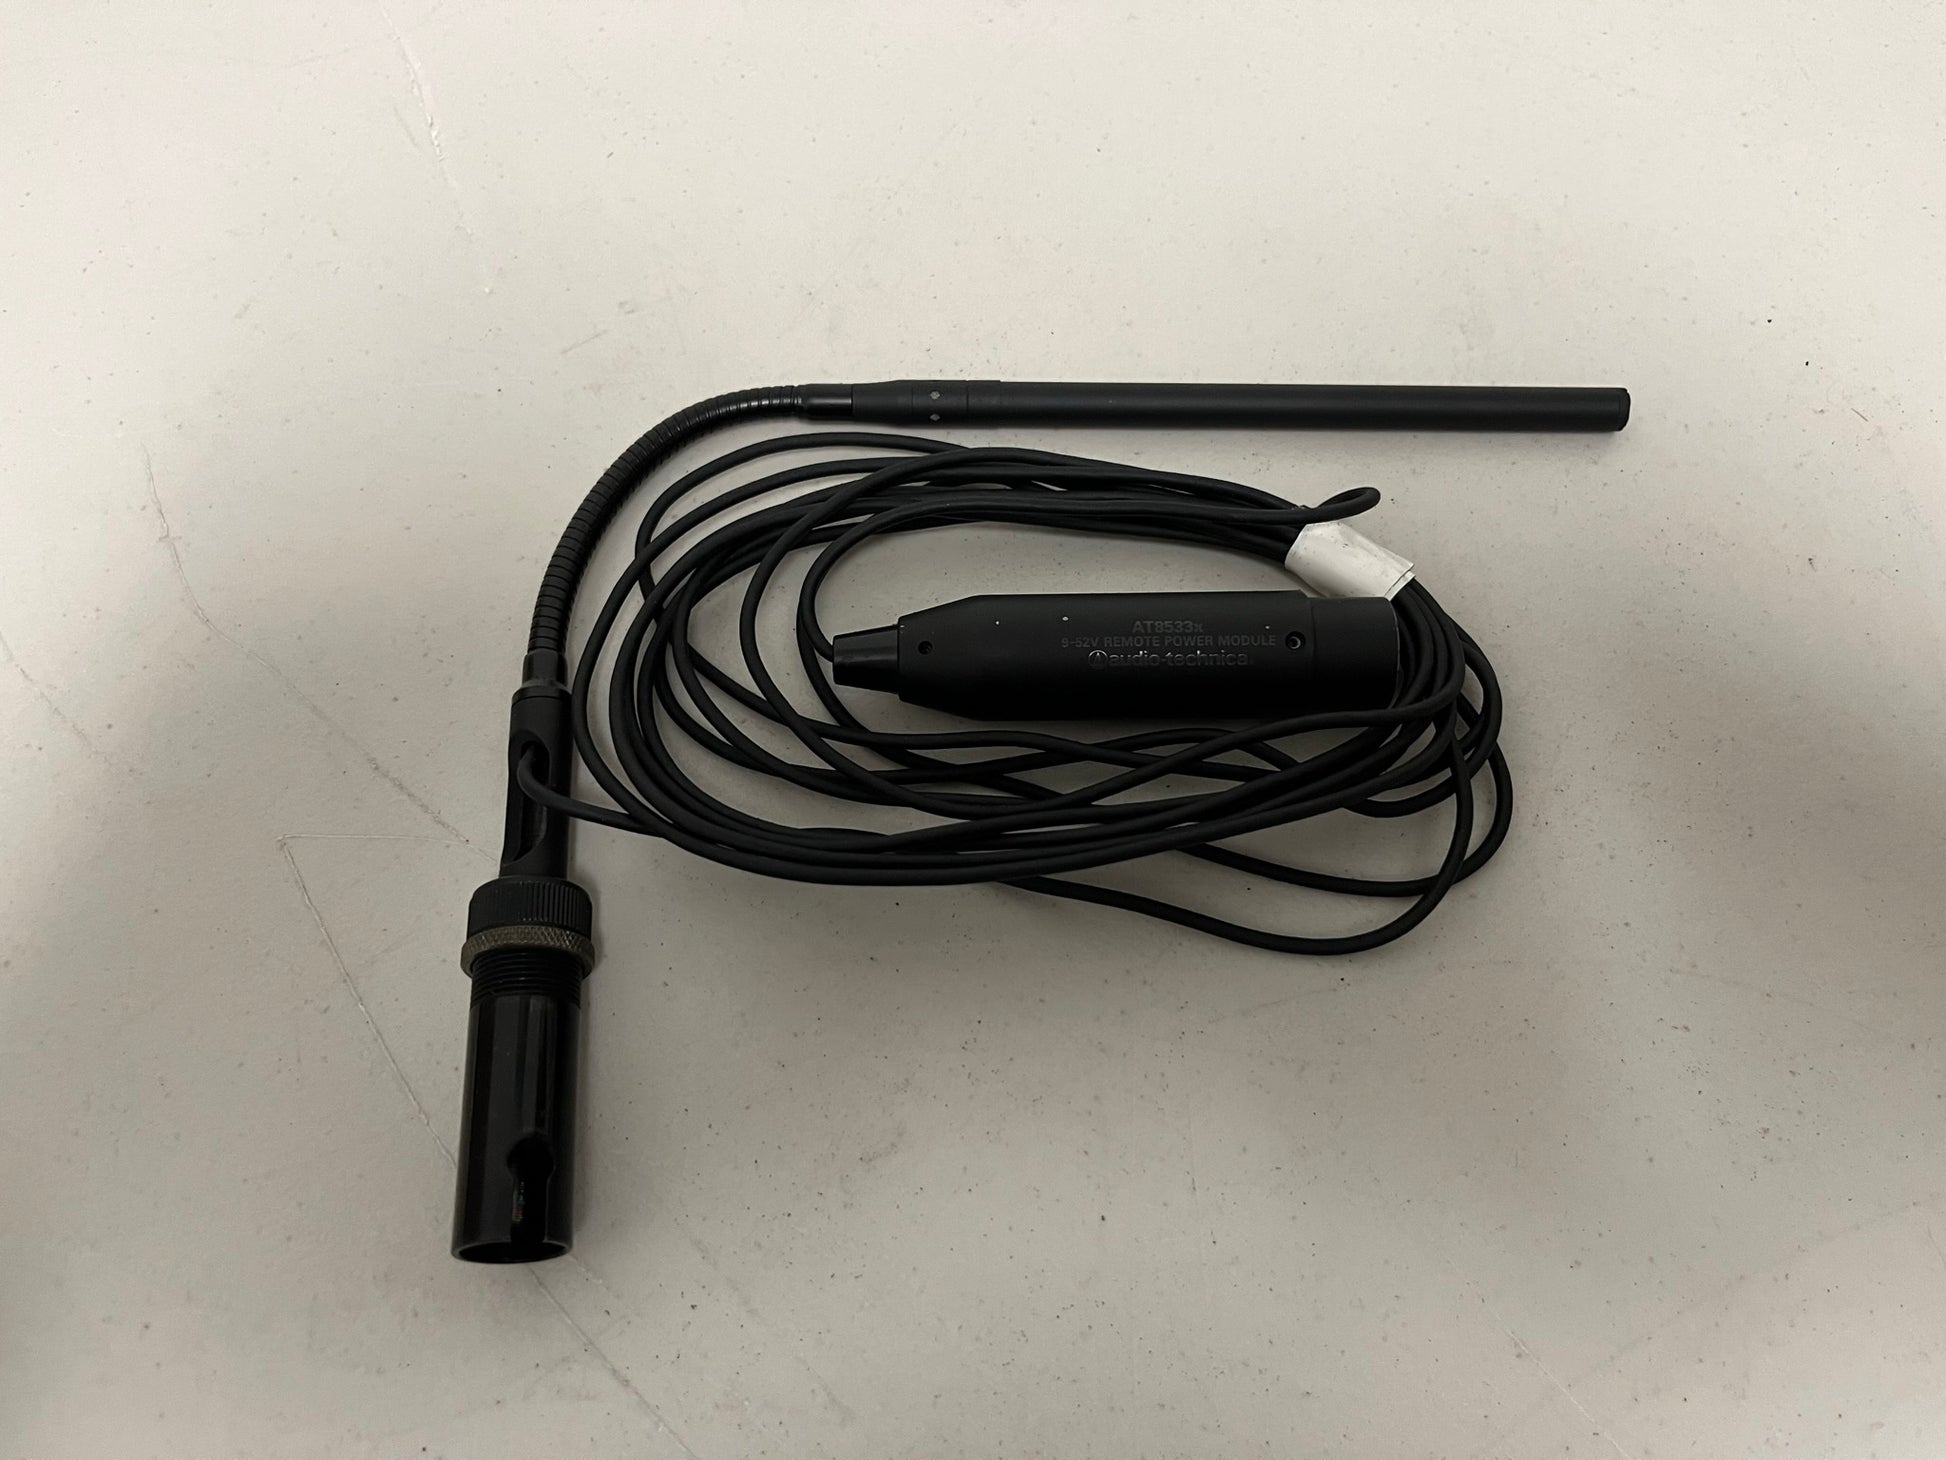 Used Audio-Technica AT935AMRx w/AT8533x 9-52V Remote Power Module for Sale. We Sell Professional Audio Equipment. Audio Systems, Amplifiers, Consoles, Mixers, Electronics, Entertainment, Sound, Live.